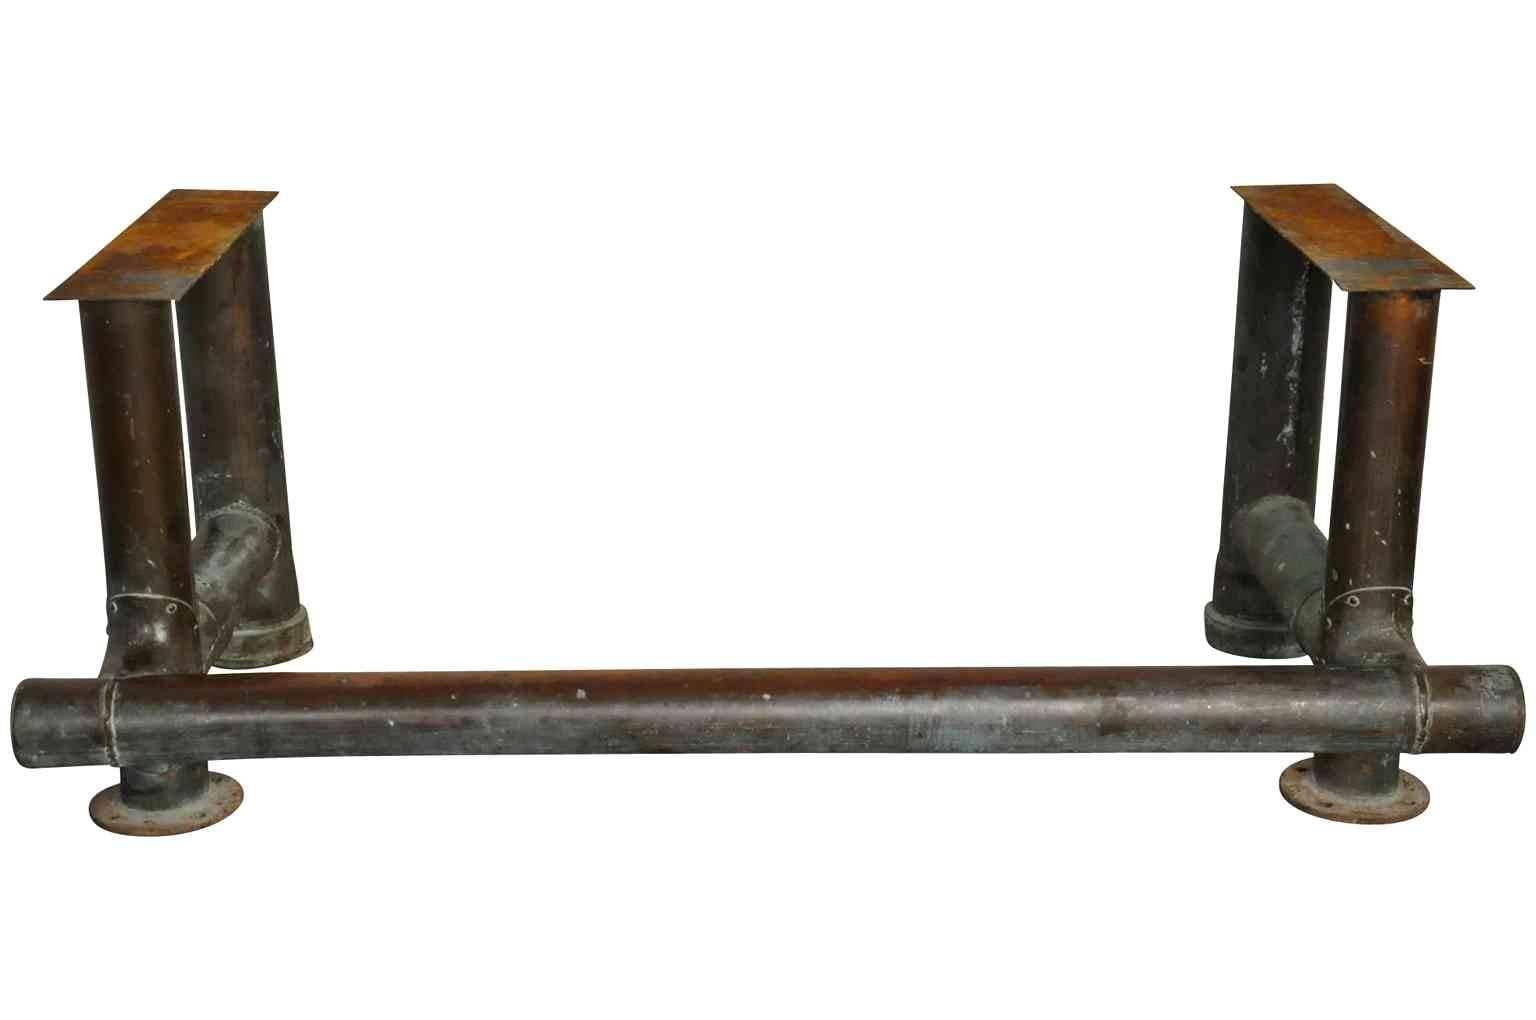 A fantastic, French, early 20th century base - from a ship - in copper. Constructed from very heavy gauge copper. This piece can become an exceptional base for a kitchen island or bar counter. Imagine it with a very thick butcher block top, or a